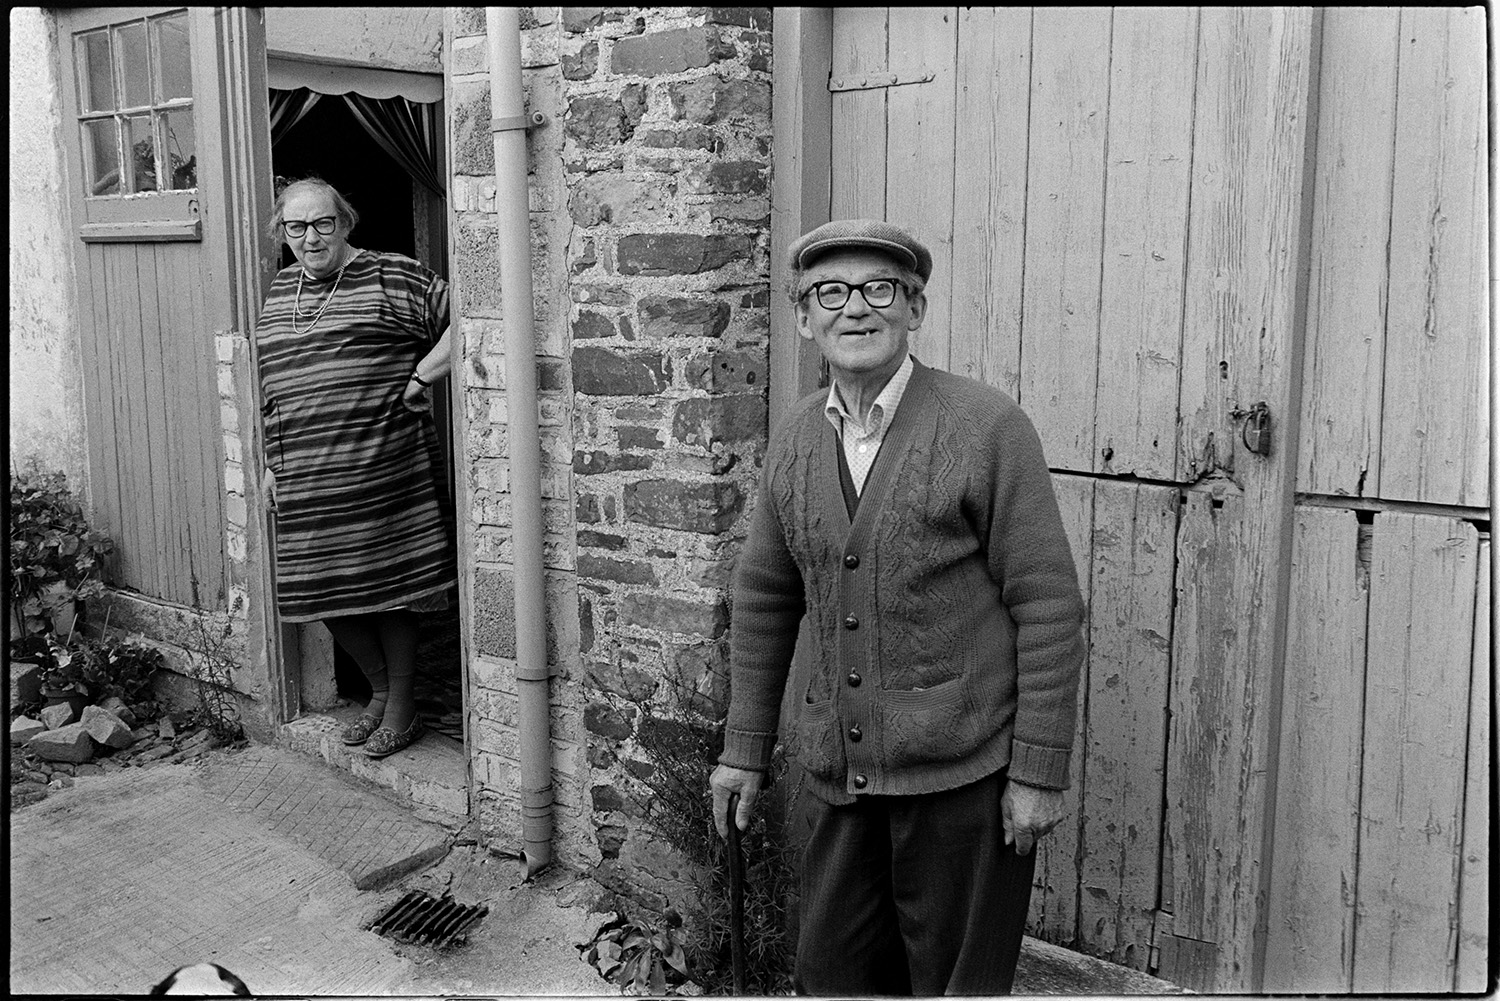 Old couple outside former wheelwright's shop. 
[Mr Bright and Mrs Bright stood by the wooden doorway to a former wheelwright's workshop by the churchyard path in Beaford.]